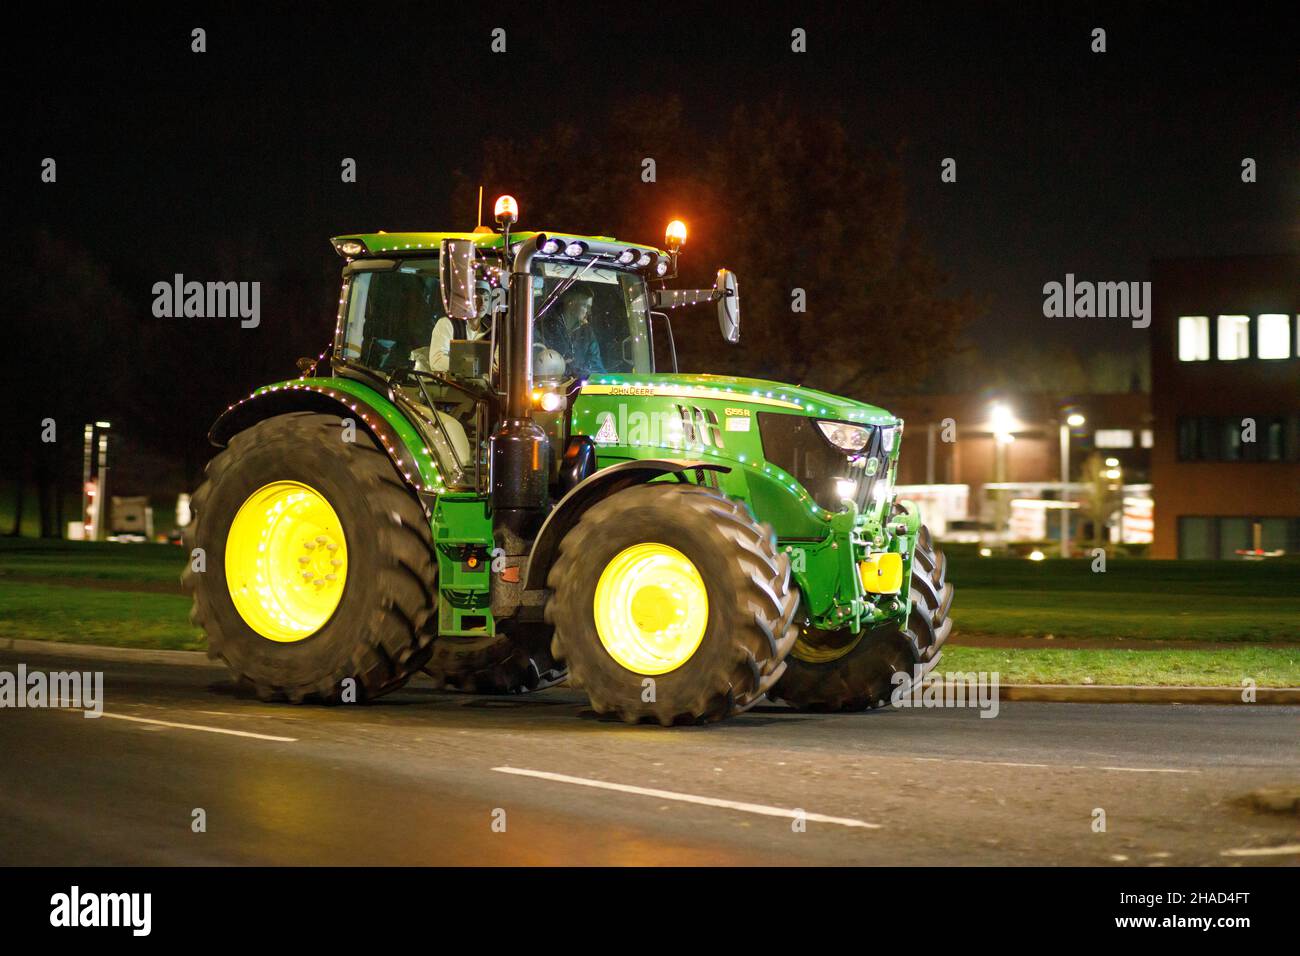 The third annual Christmas decorated tractor parade. Over 70 tractors covered in bright festive lights made their way through the villages of Warwickshire over two evenings. The event is organised by the Sheepy Ploughing Association. The farmers raised over twenty thousand pounds. Stock Photo